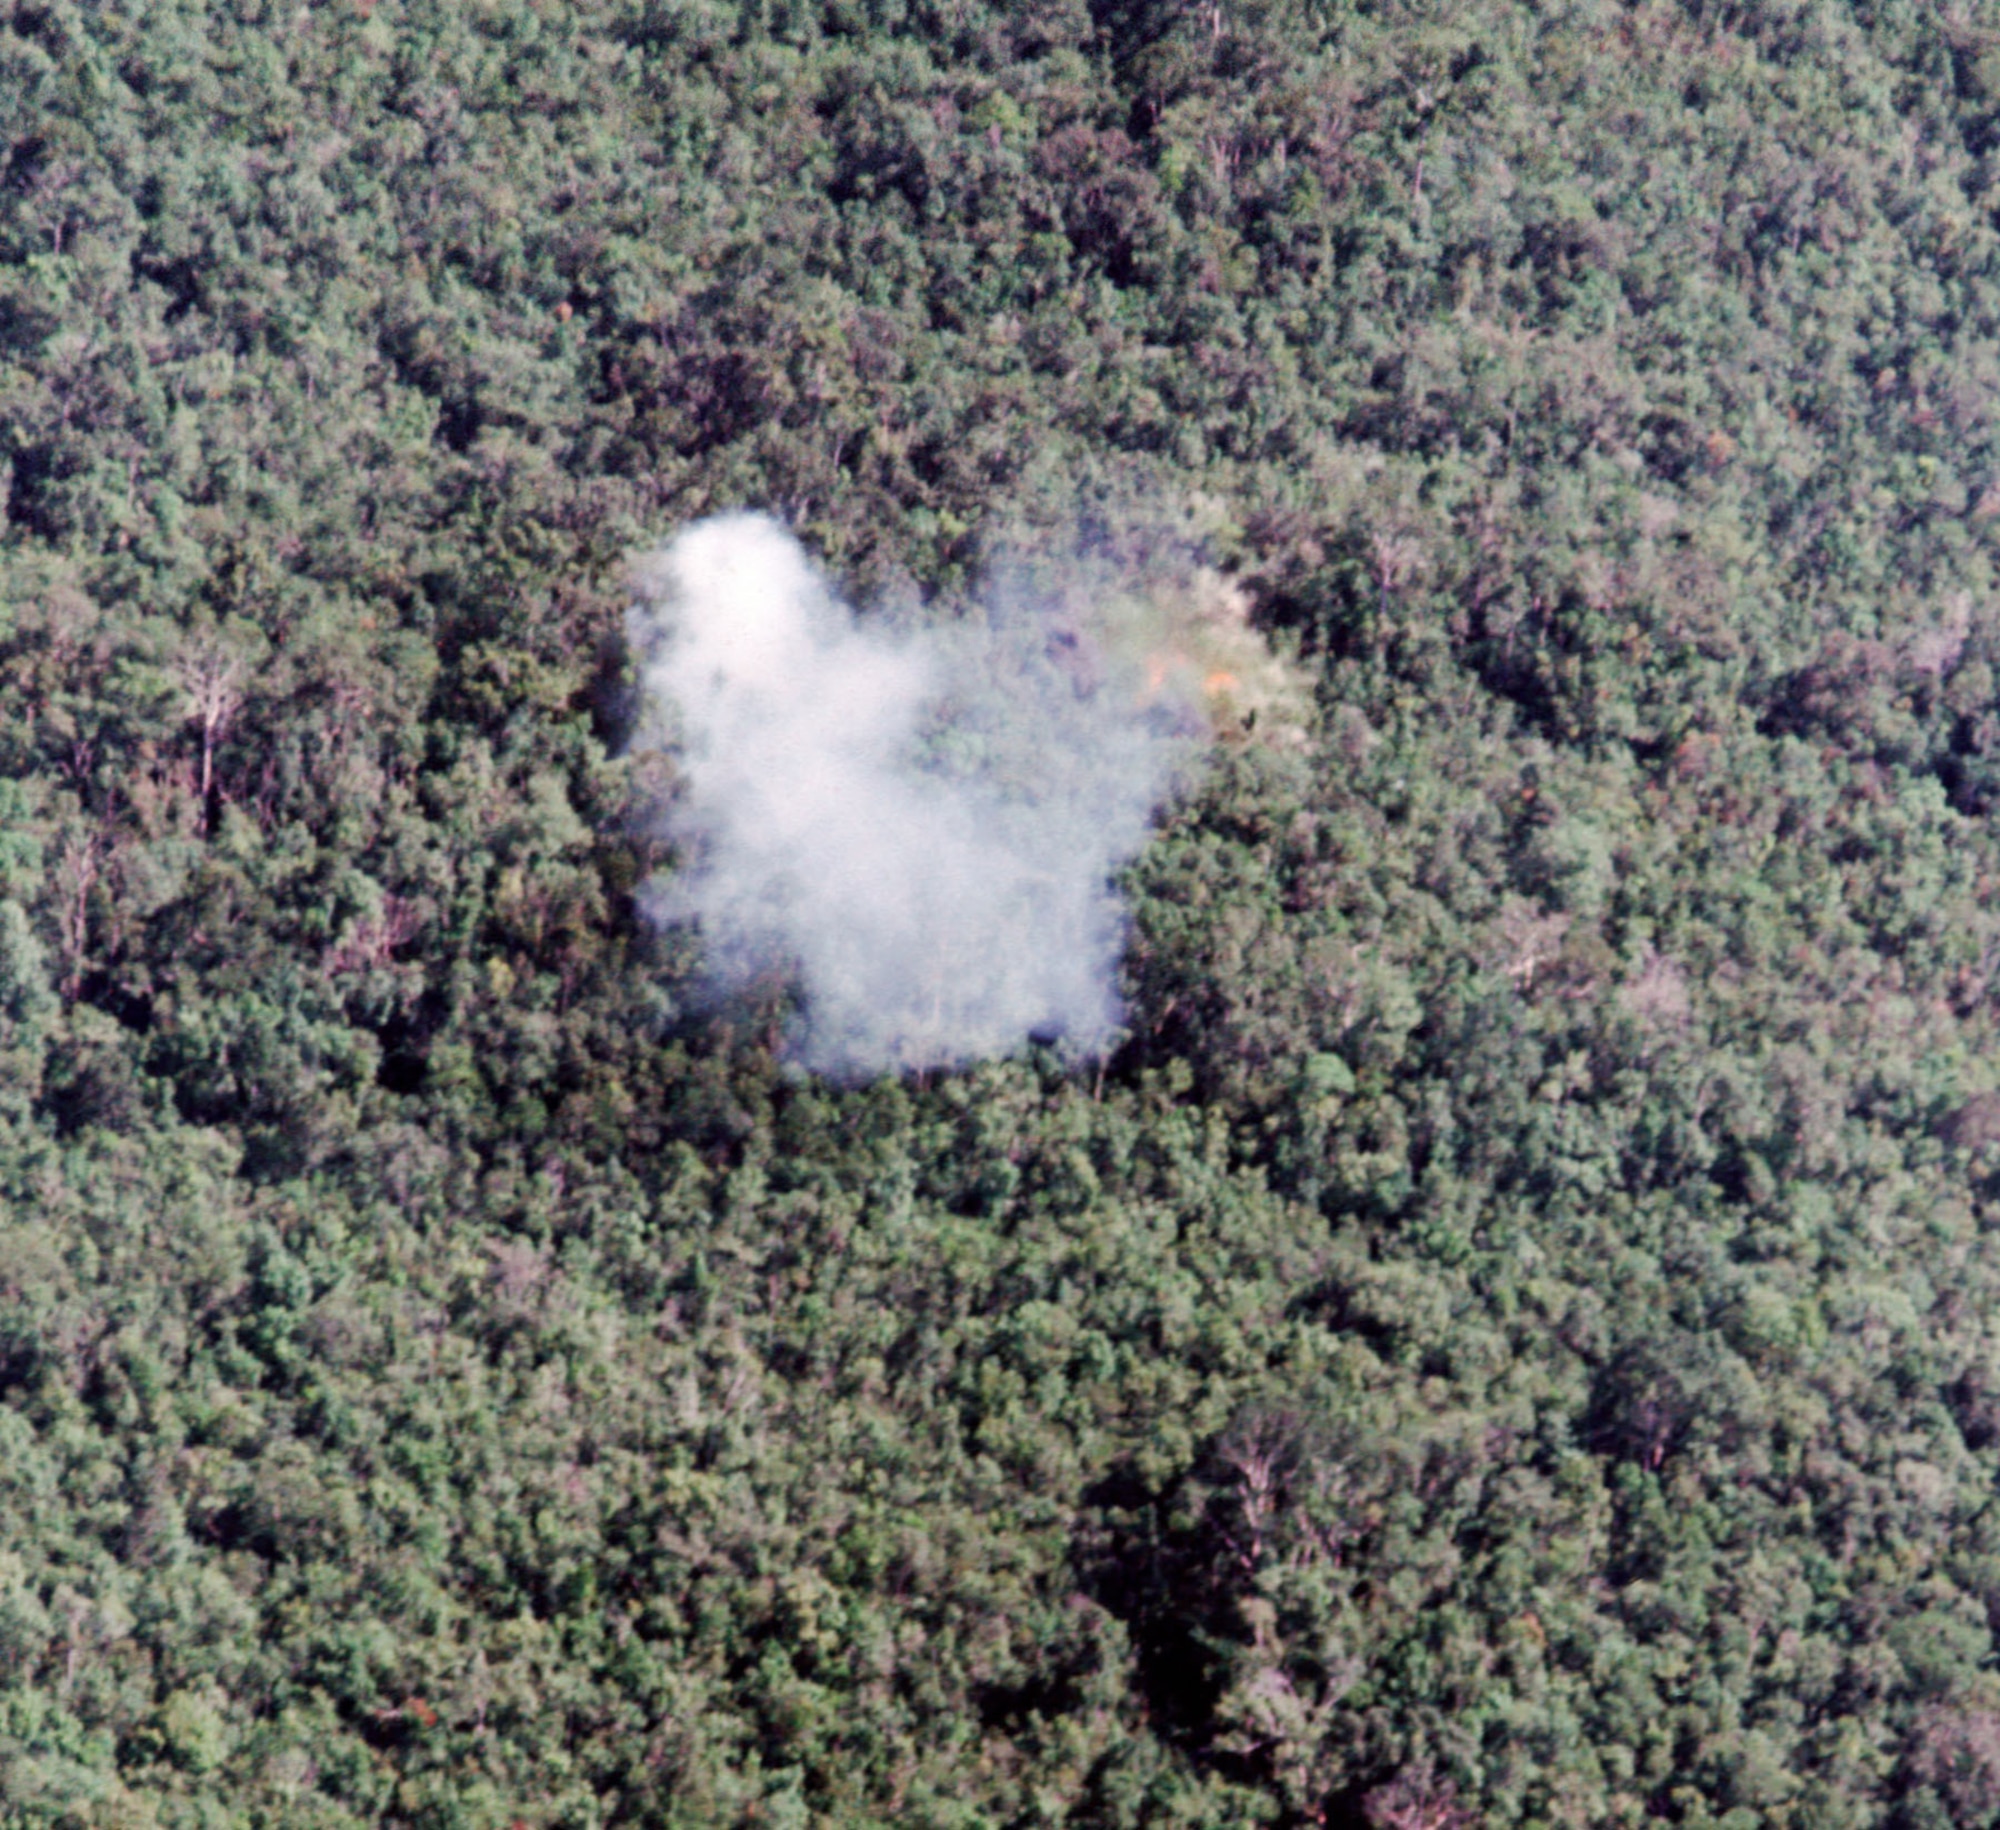 Smoke from a white phosphorus rocket marking the target. The FAC used this smoke to guide the strike aircraft and direct the attack. When certain that the fighter pilot was attacking the correct target, using the right weapons, and not threatening friendly troops or civilians, the FAC gave permission to attack. (U.S. Air Force photo)